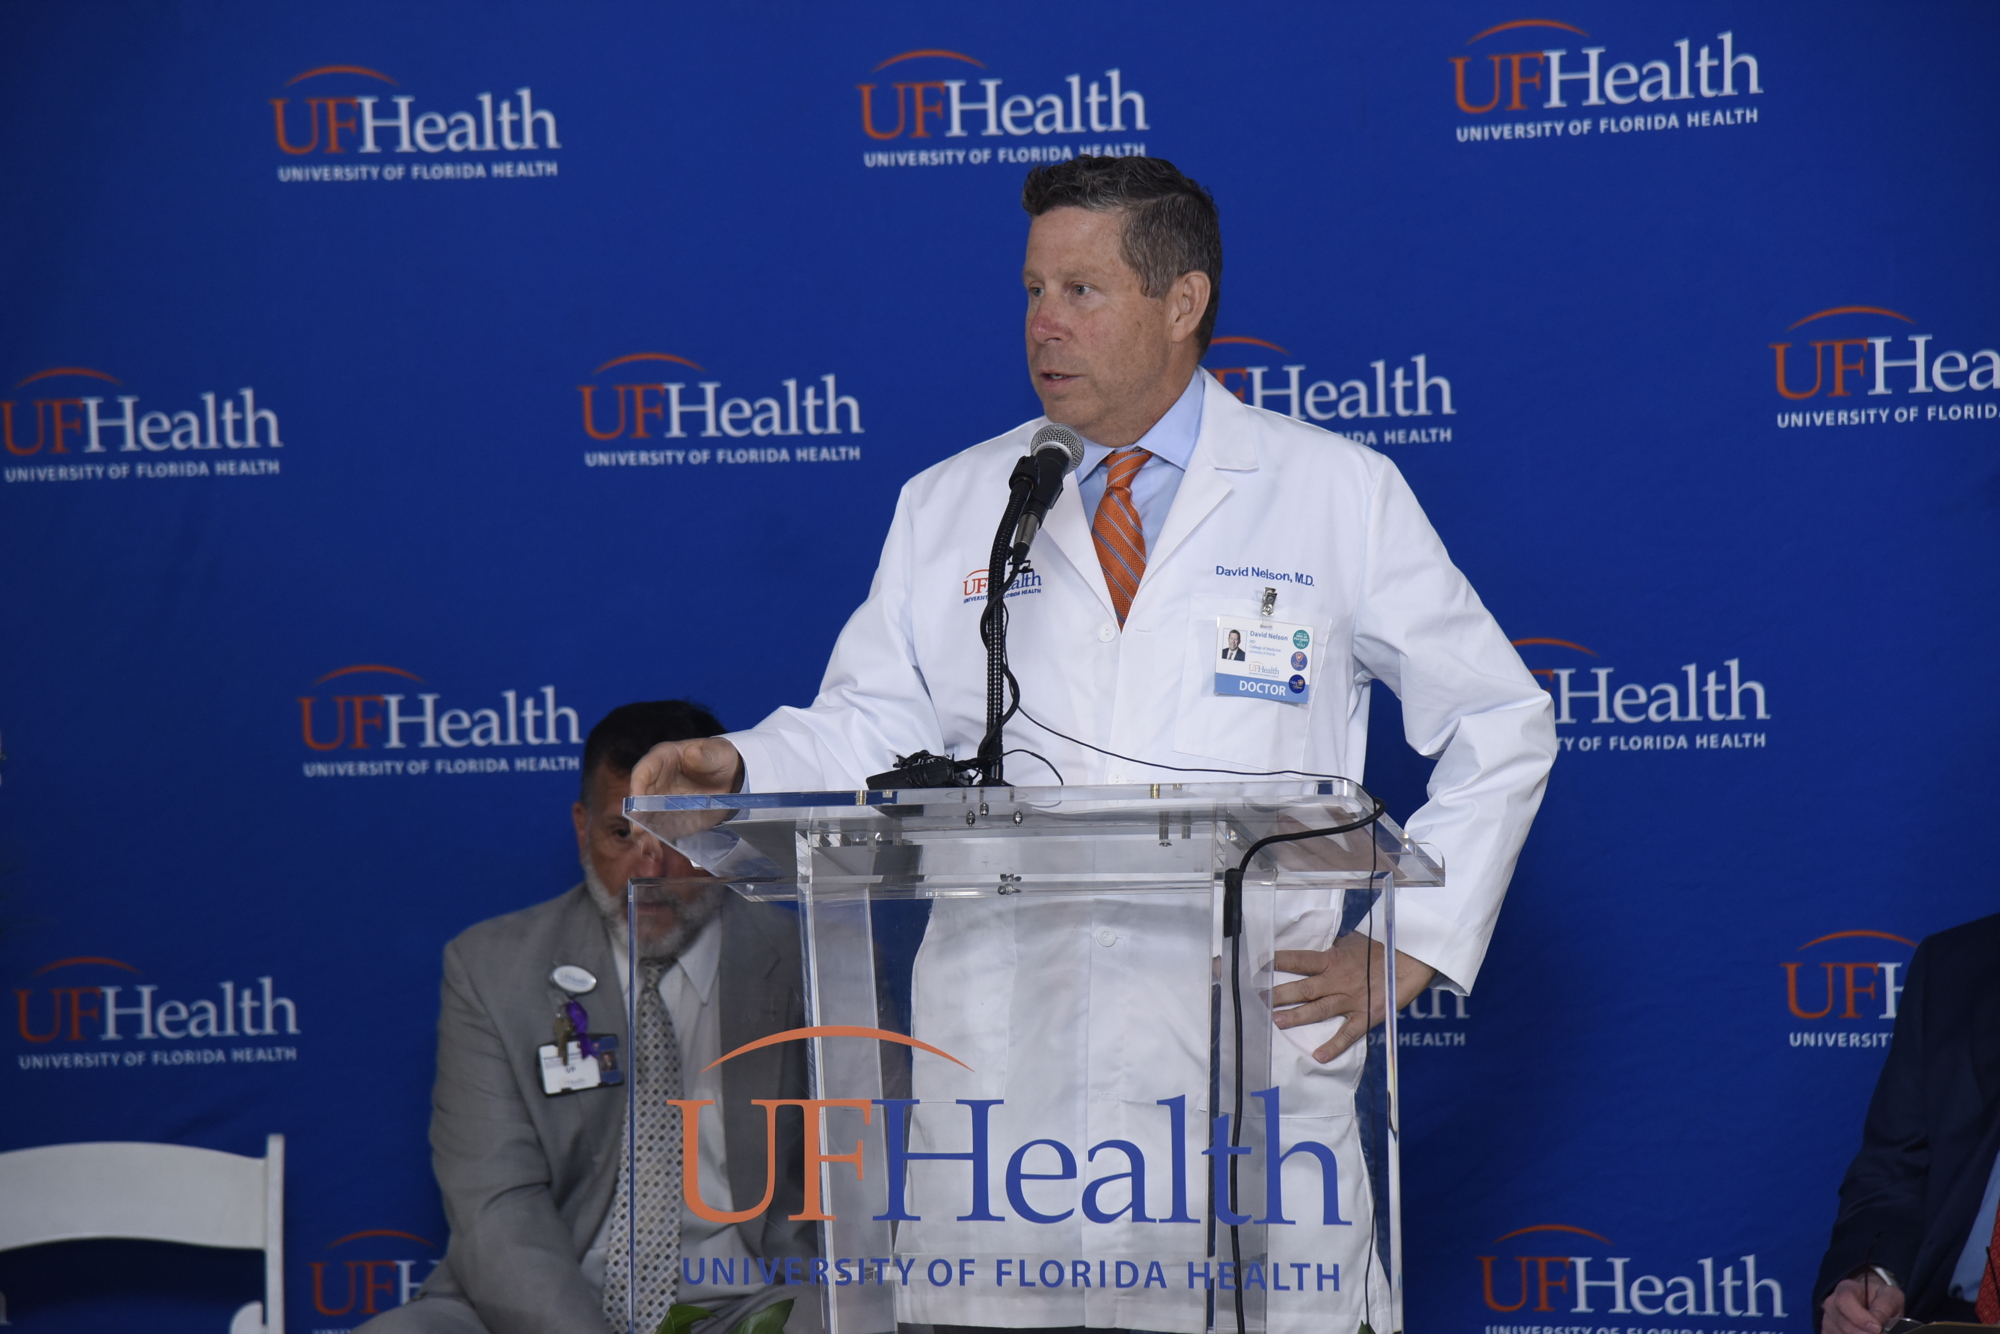 Dr. David R. Nelson, senior vice president for health affairs at the University of Florida and president of UF Health, speaks at the groundbreaking ceremony.